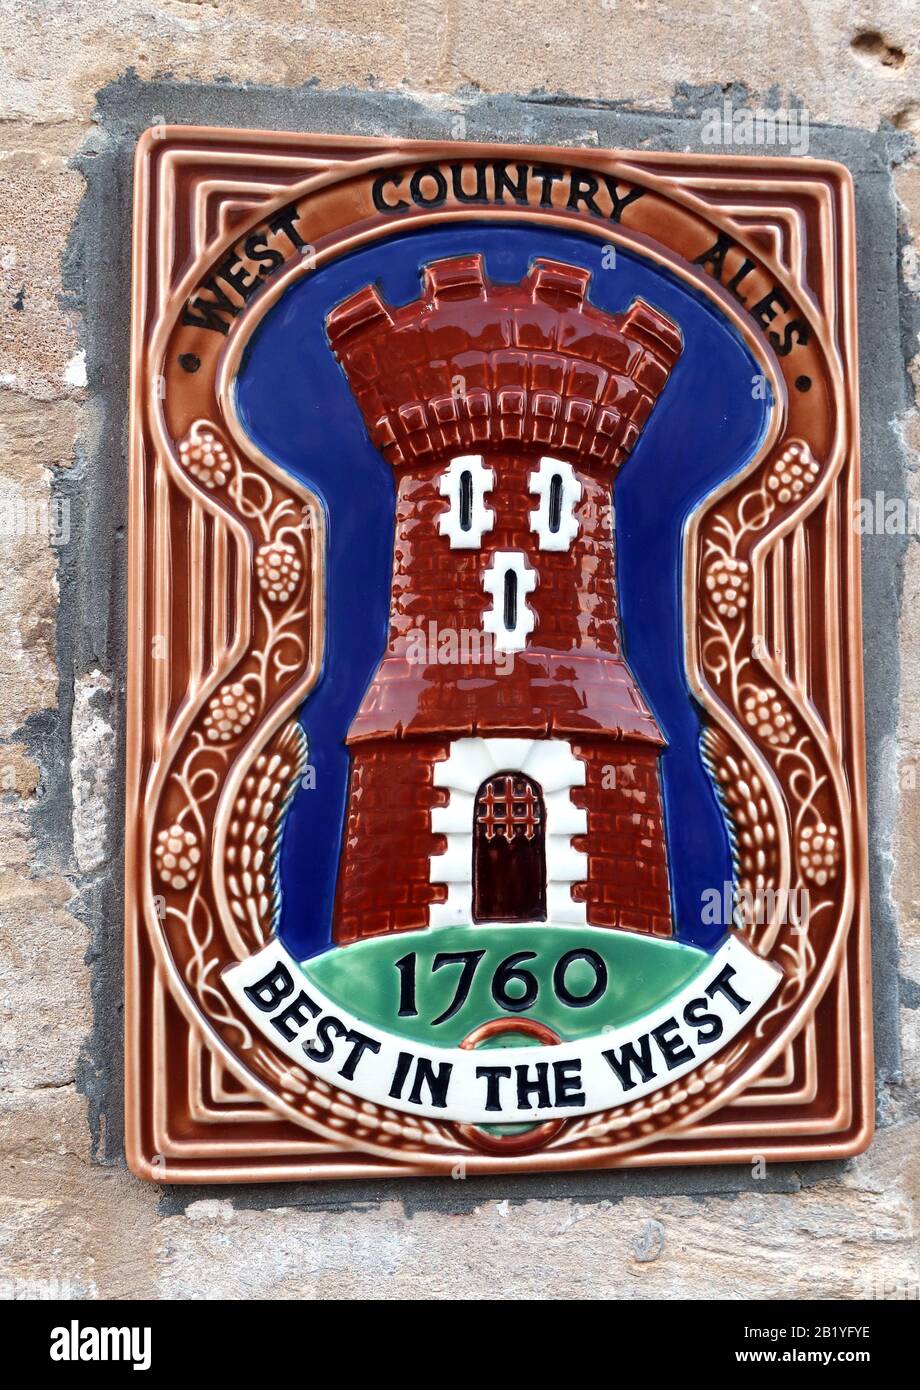 West Country Ales ceramic plaque - 1760 - Best In The west - Tetbury, Gloucestershire, Cotswolds, South West,England, UK Stock Photo